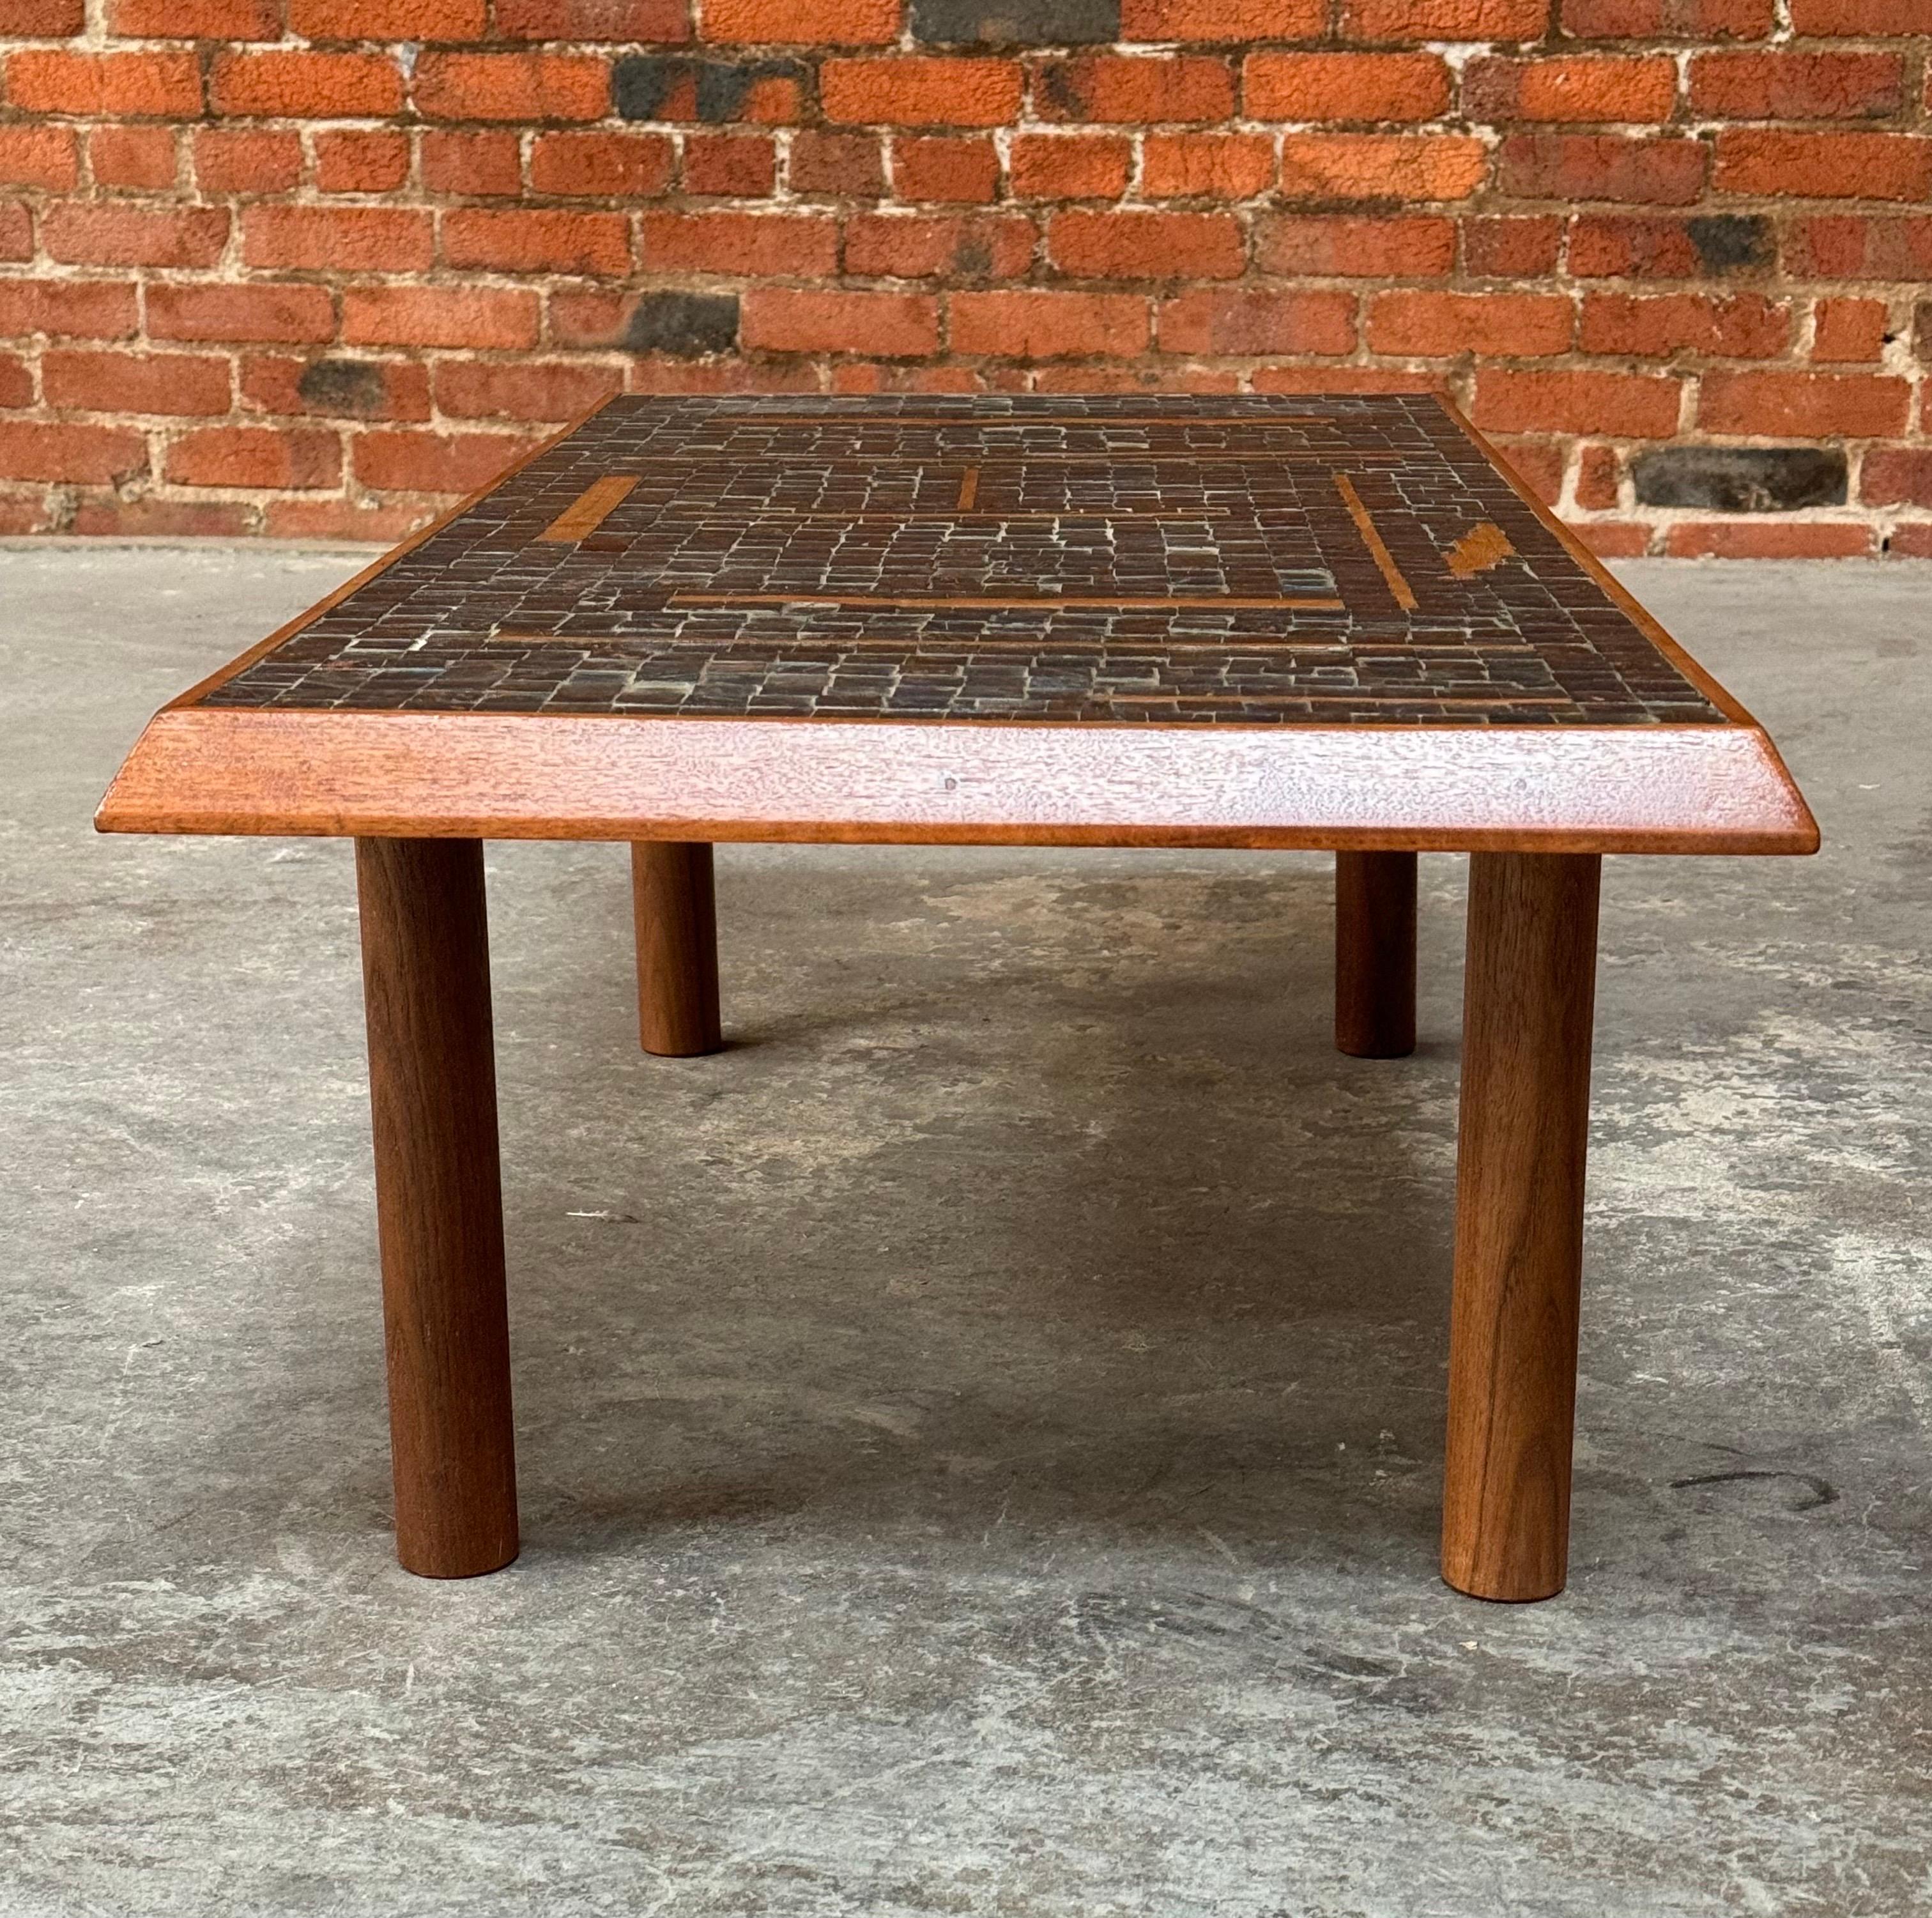 Mid-20th Century 1950s Handmade  Glass Tile Mosaic with Walnut Inlay Coffee Table For Sale